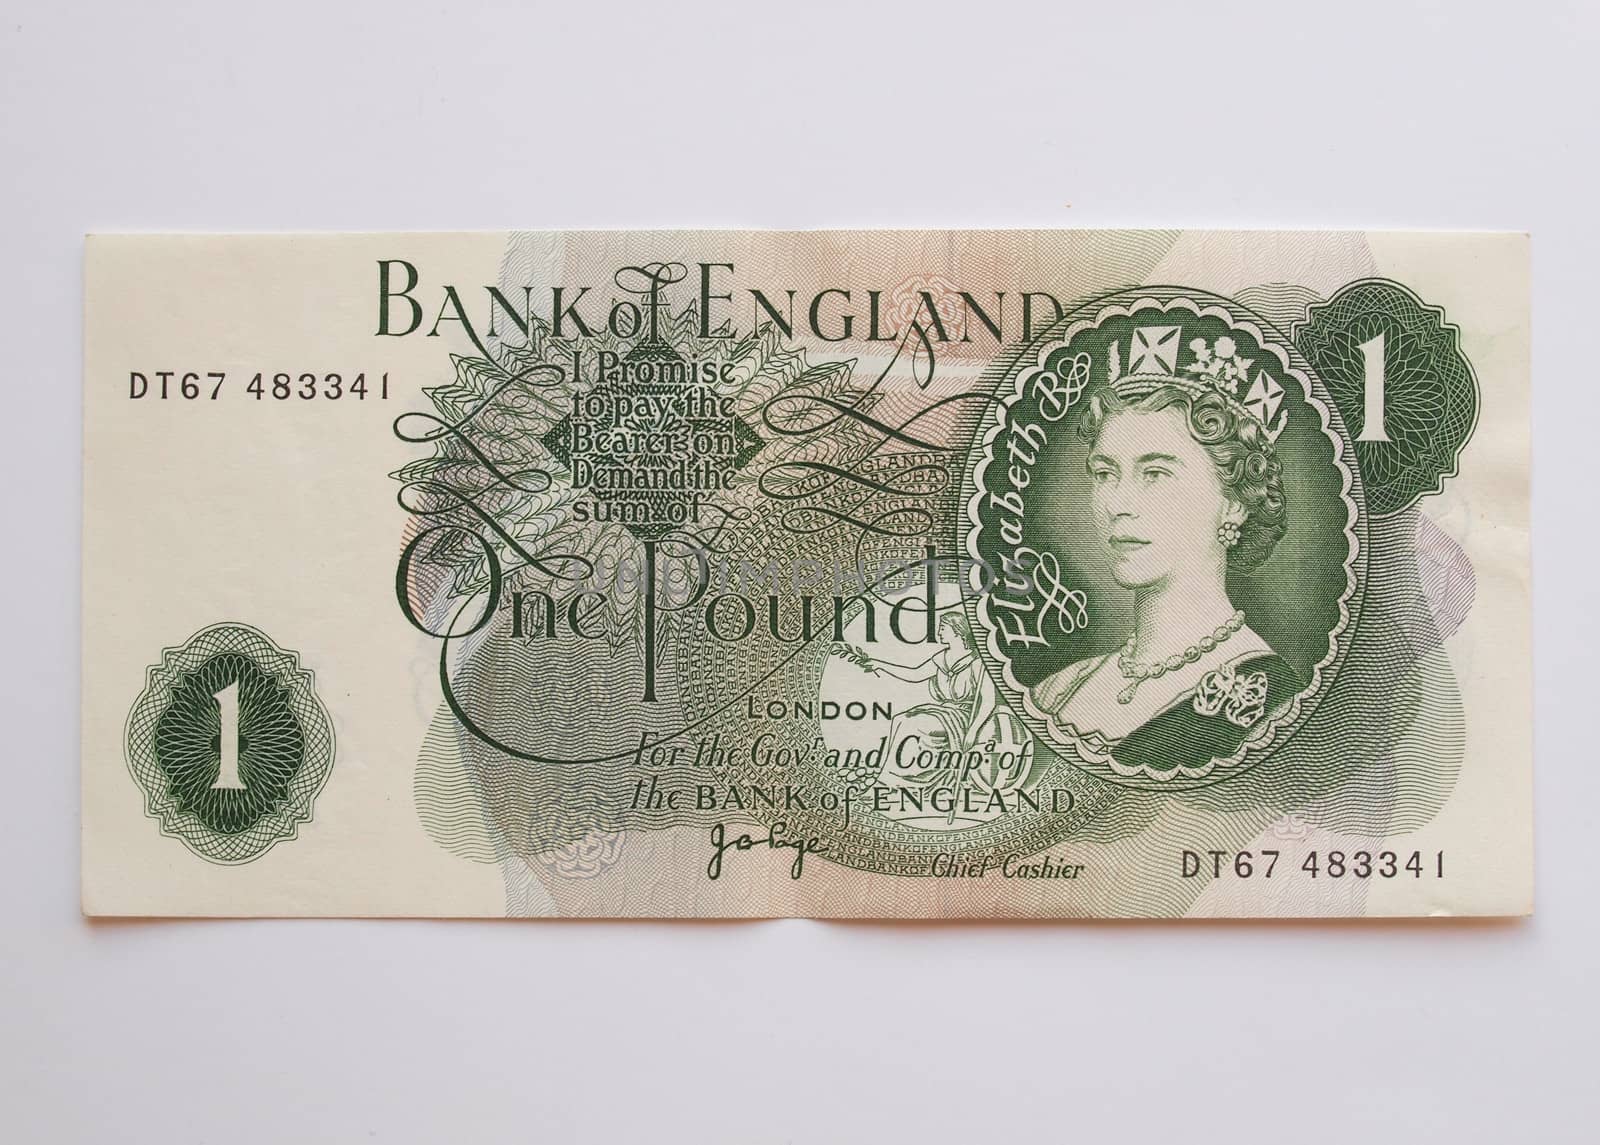 one Sterling Pound note, circa 1970 by paolo77